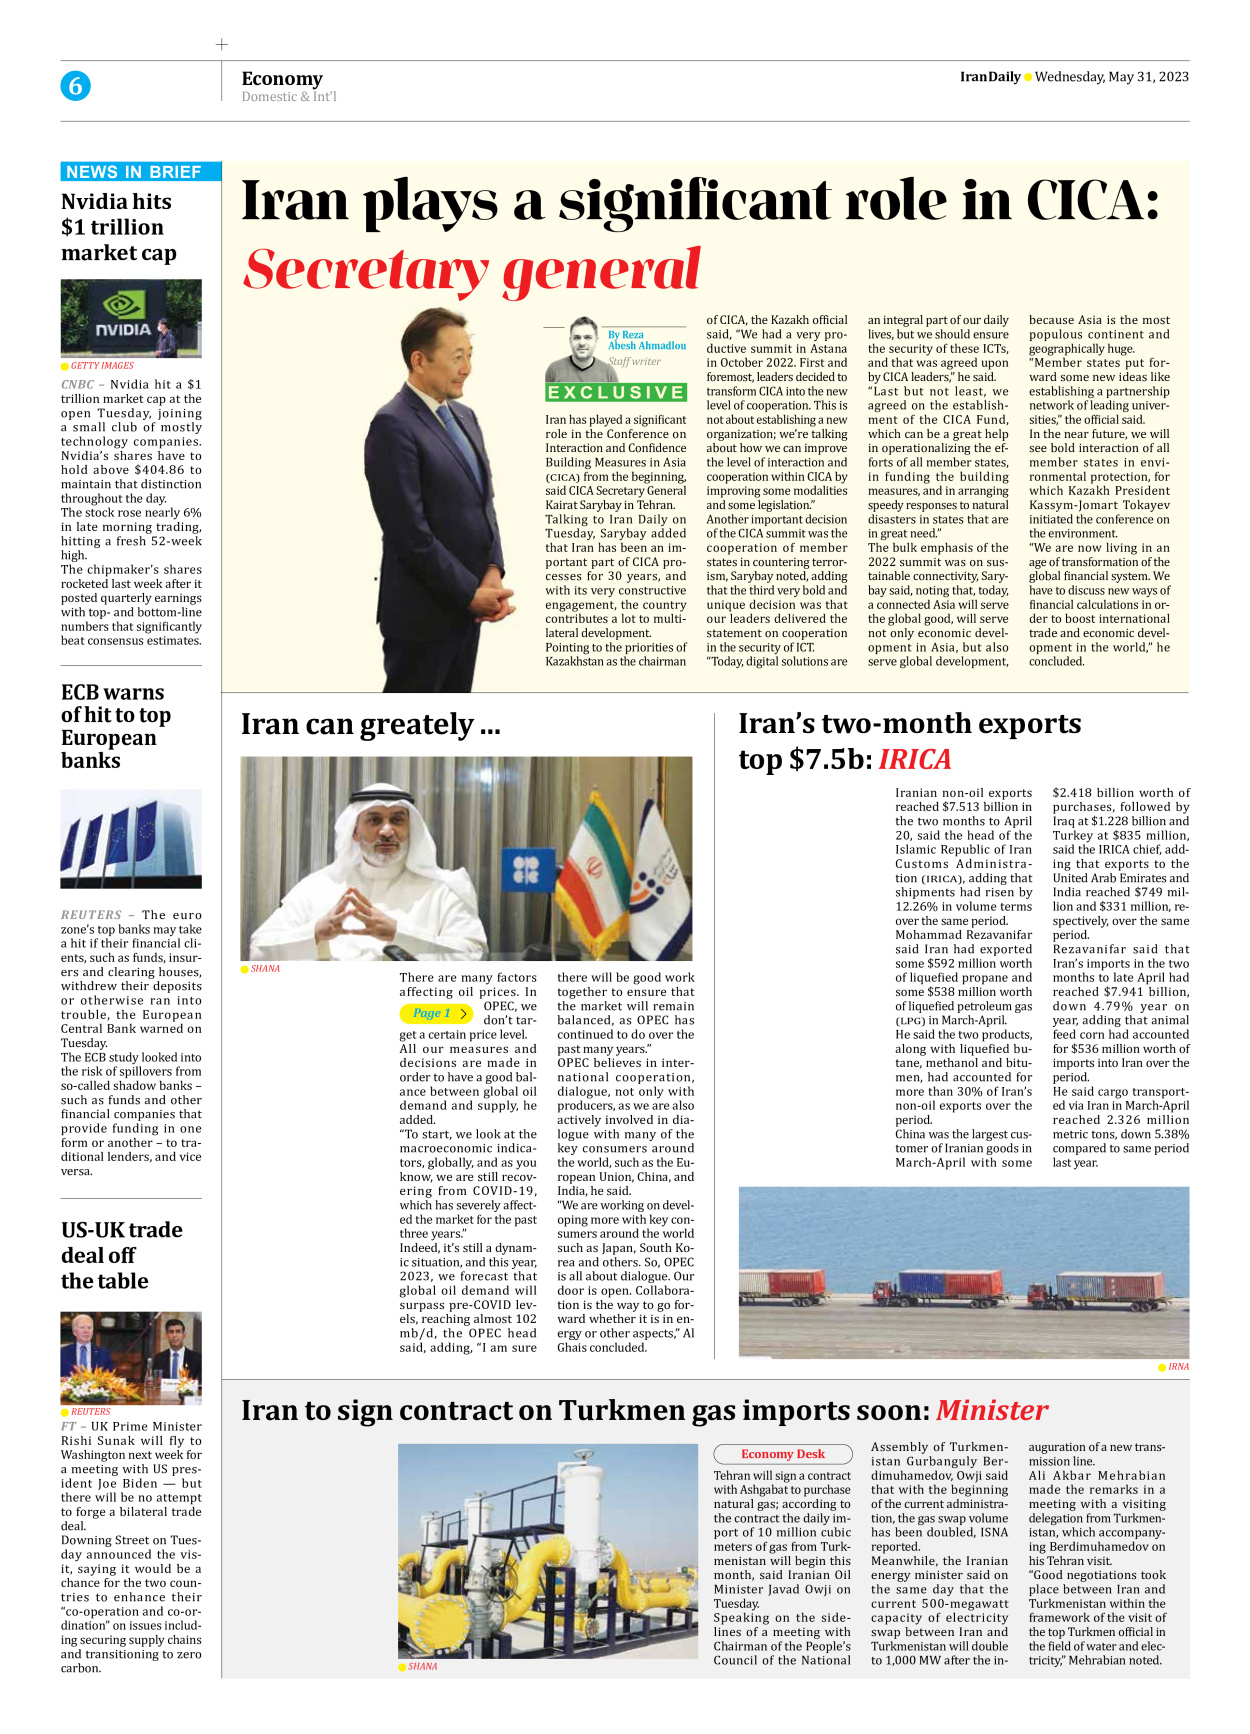 Iran Daily - Number Seven Thousand Three Hundred and Five - 31 May 2023 - Page 6